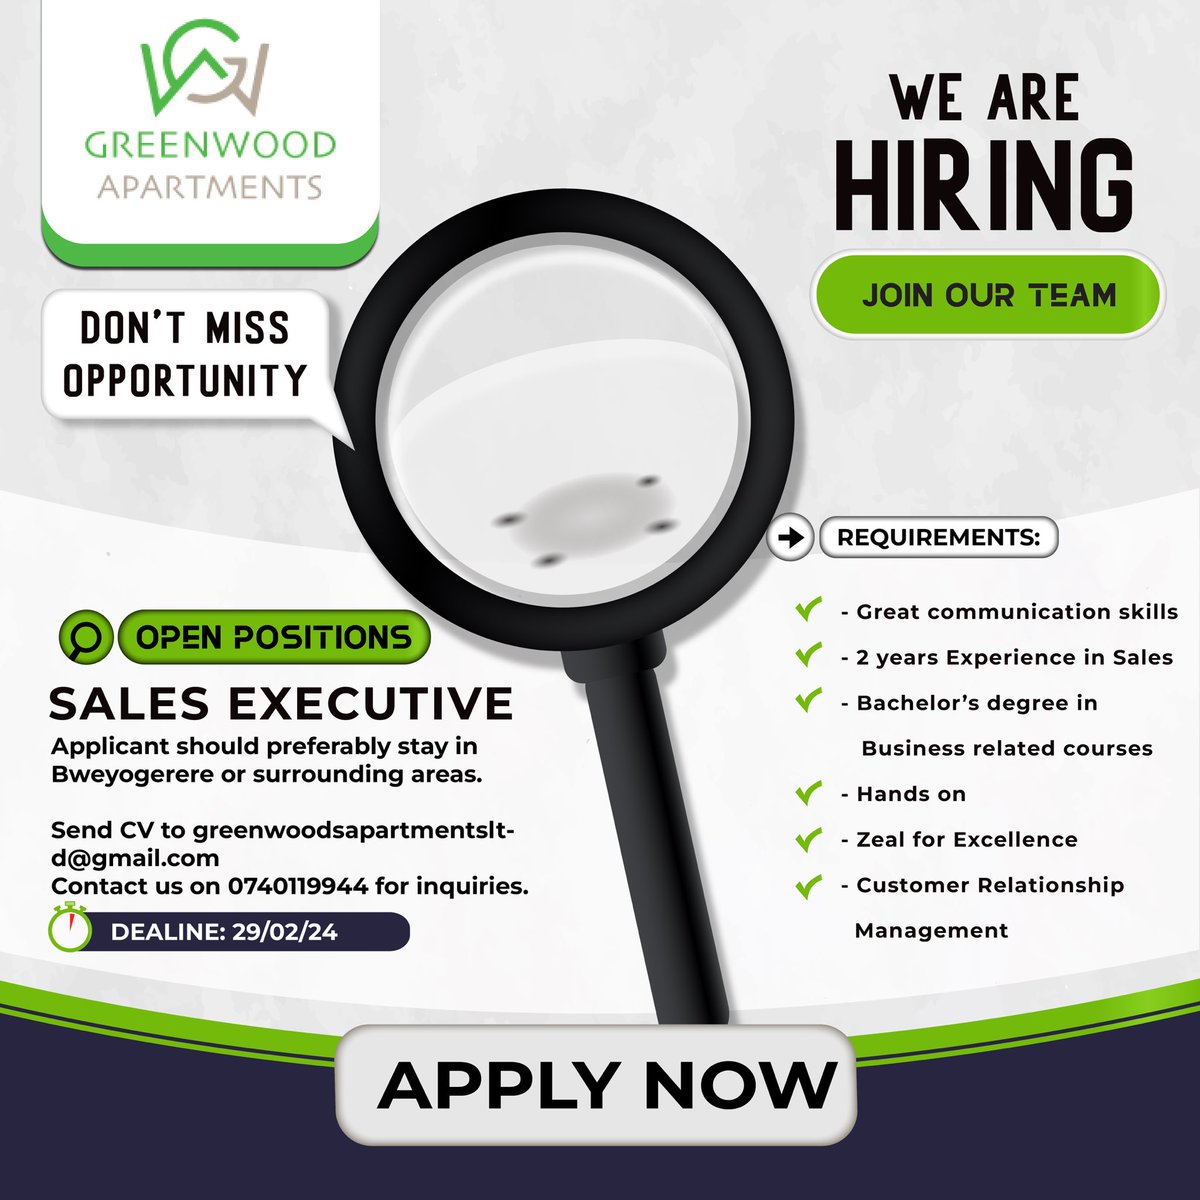 WE ARE HIRING!!!!

Join our awesome team of experts and professionals as a Sales Executive by emailing your CV to greenwoodsapartmentsltd@gmail.com or call 0740119944 for details.

#greenwoodapartments #salesexecutive #hiring #jobs #recruiting